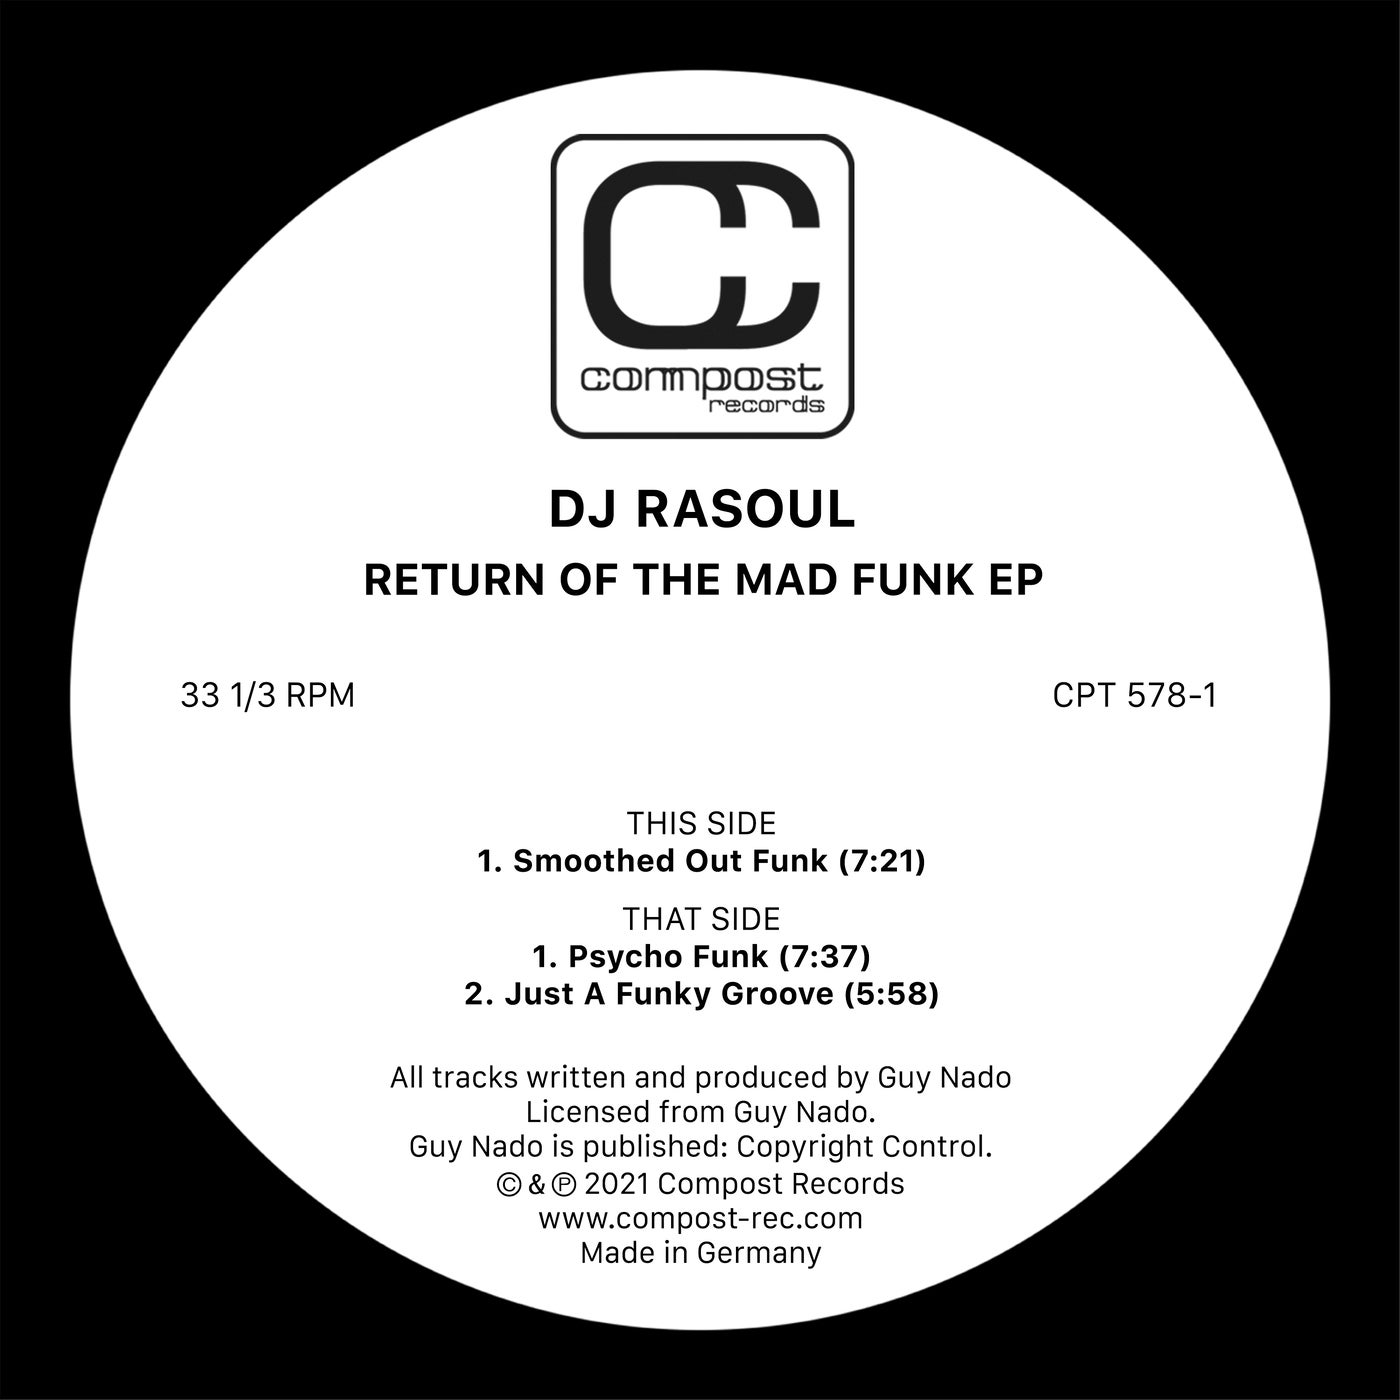 Return Of The Mad Funk EP